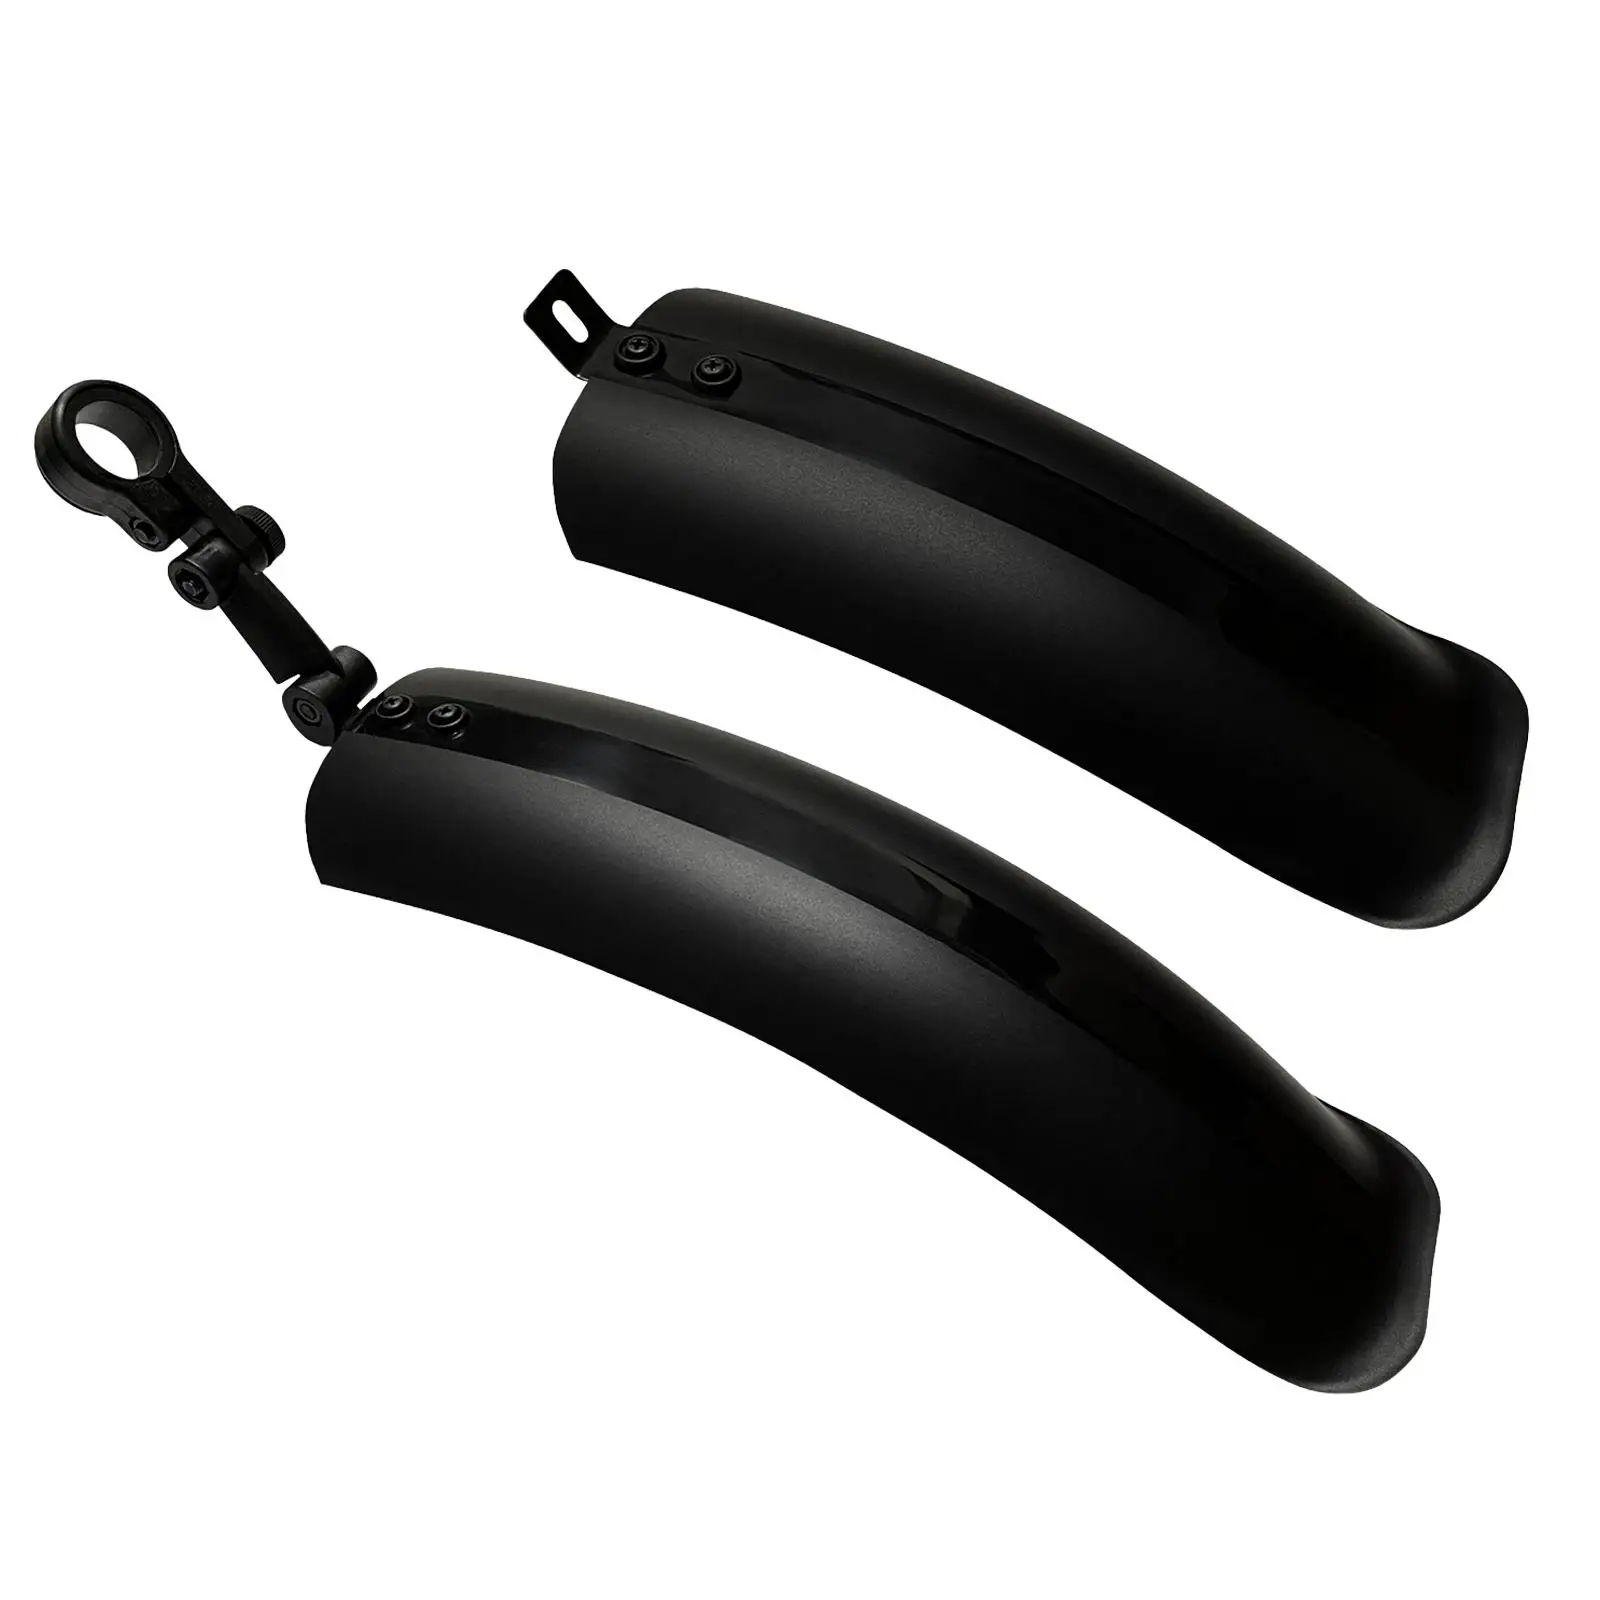 Bike Mudguard Front Rear Set Mud Guard Portable Components Accessories Front & Rear Fenders Bike Fenders for Riding Traveling